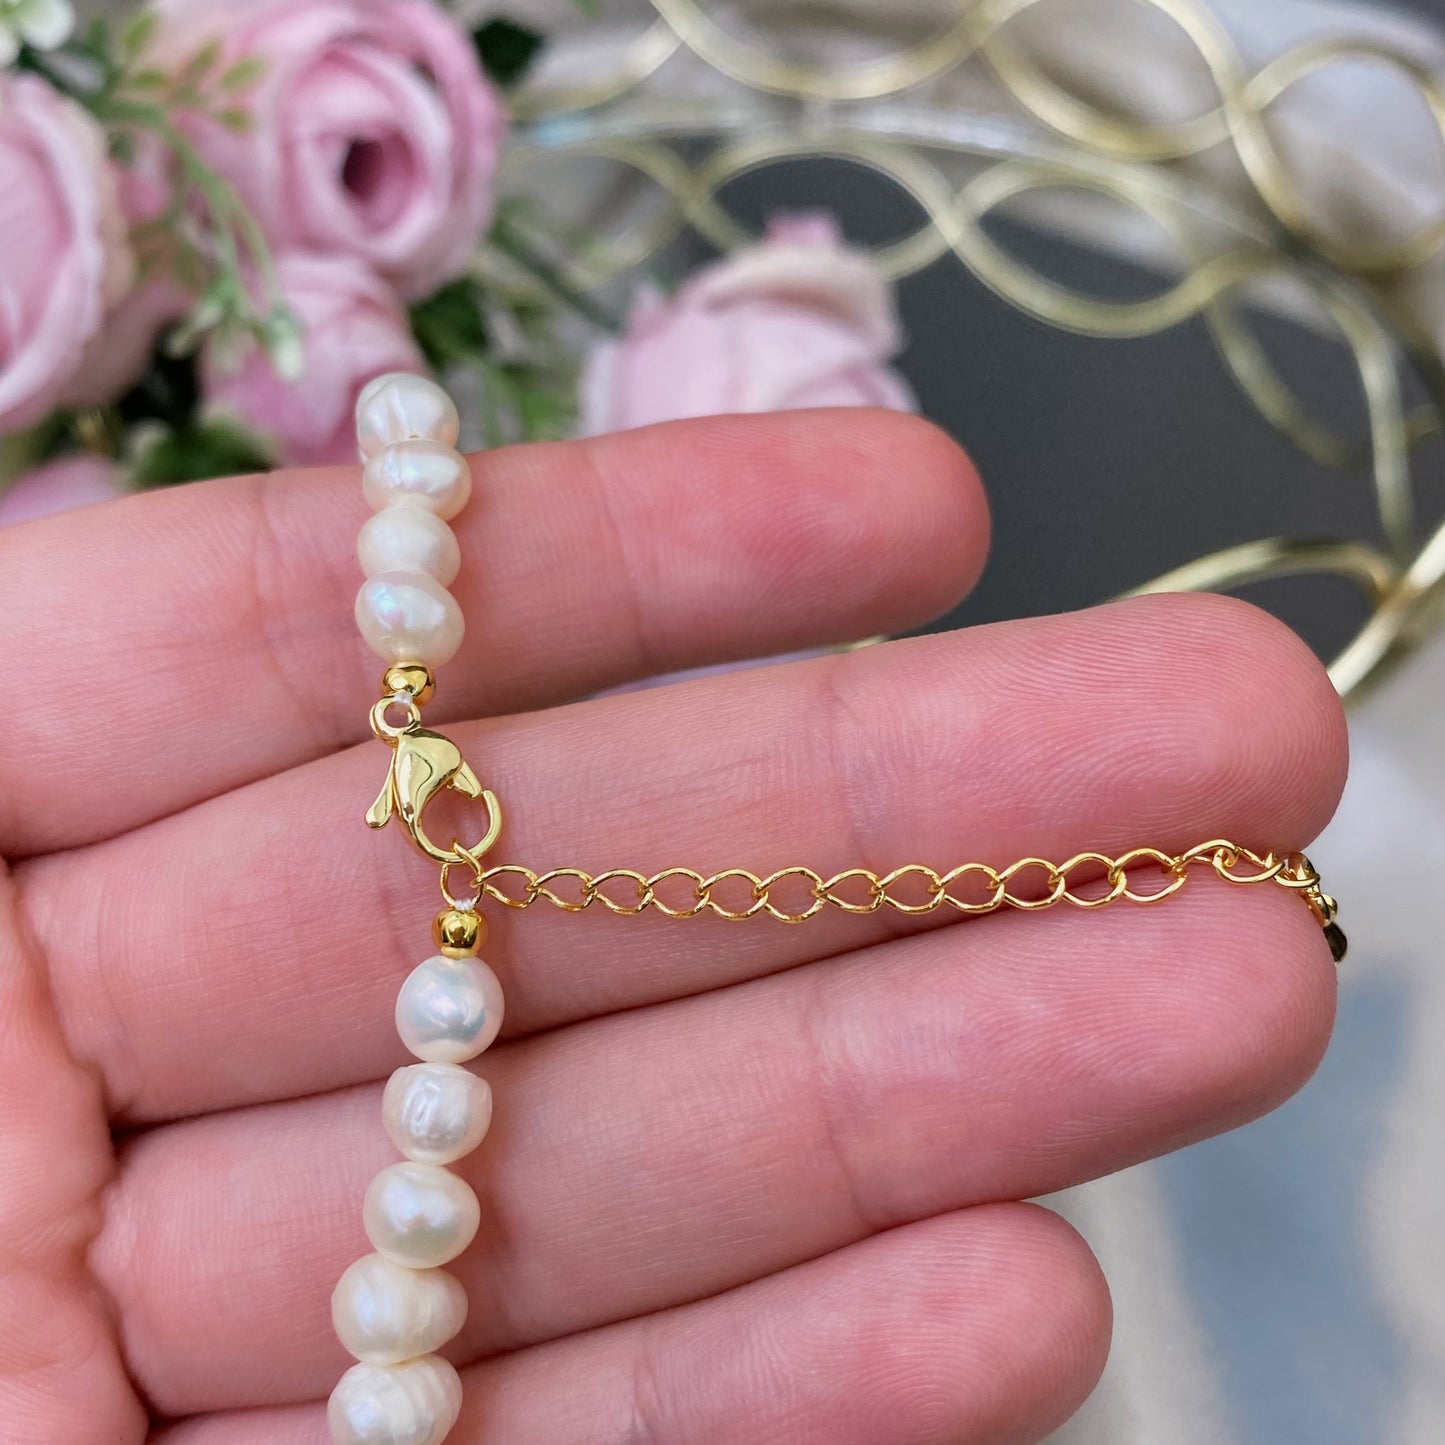 River Pearls necklace with decorative  Mother of Pearl pendant (adjustable length 38cm+5cm)